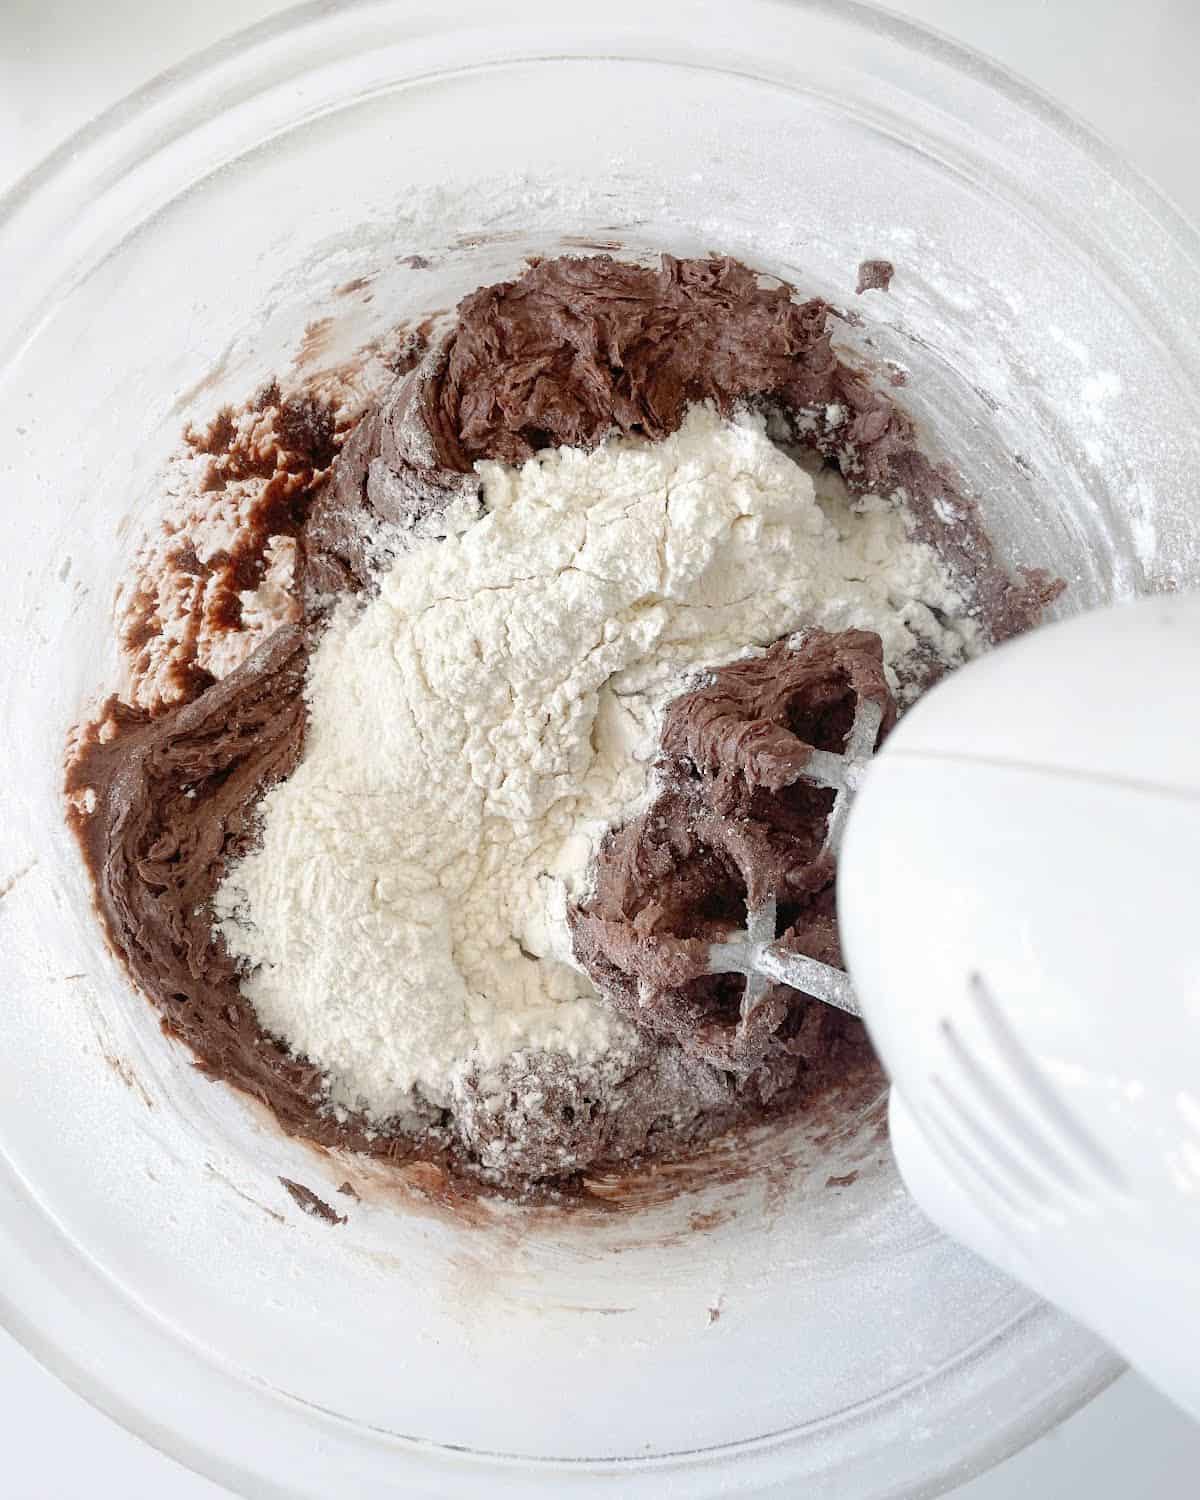 Flour added to chocolate cookie mixture in a glass bowl with an electric mixer. White marble surface.